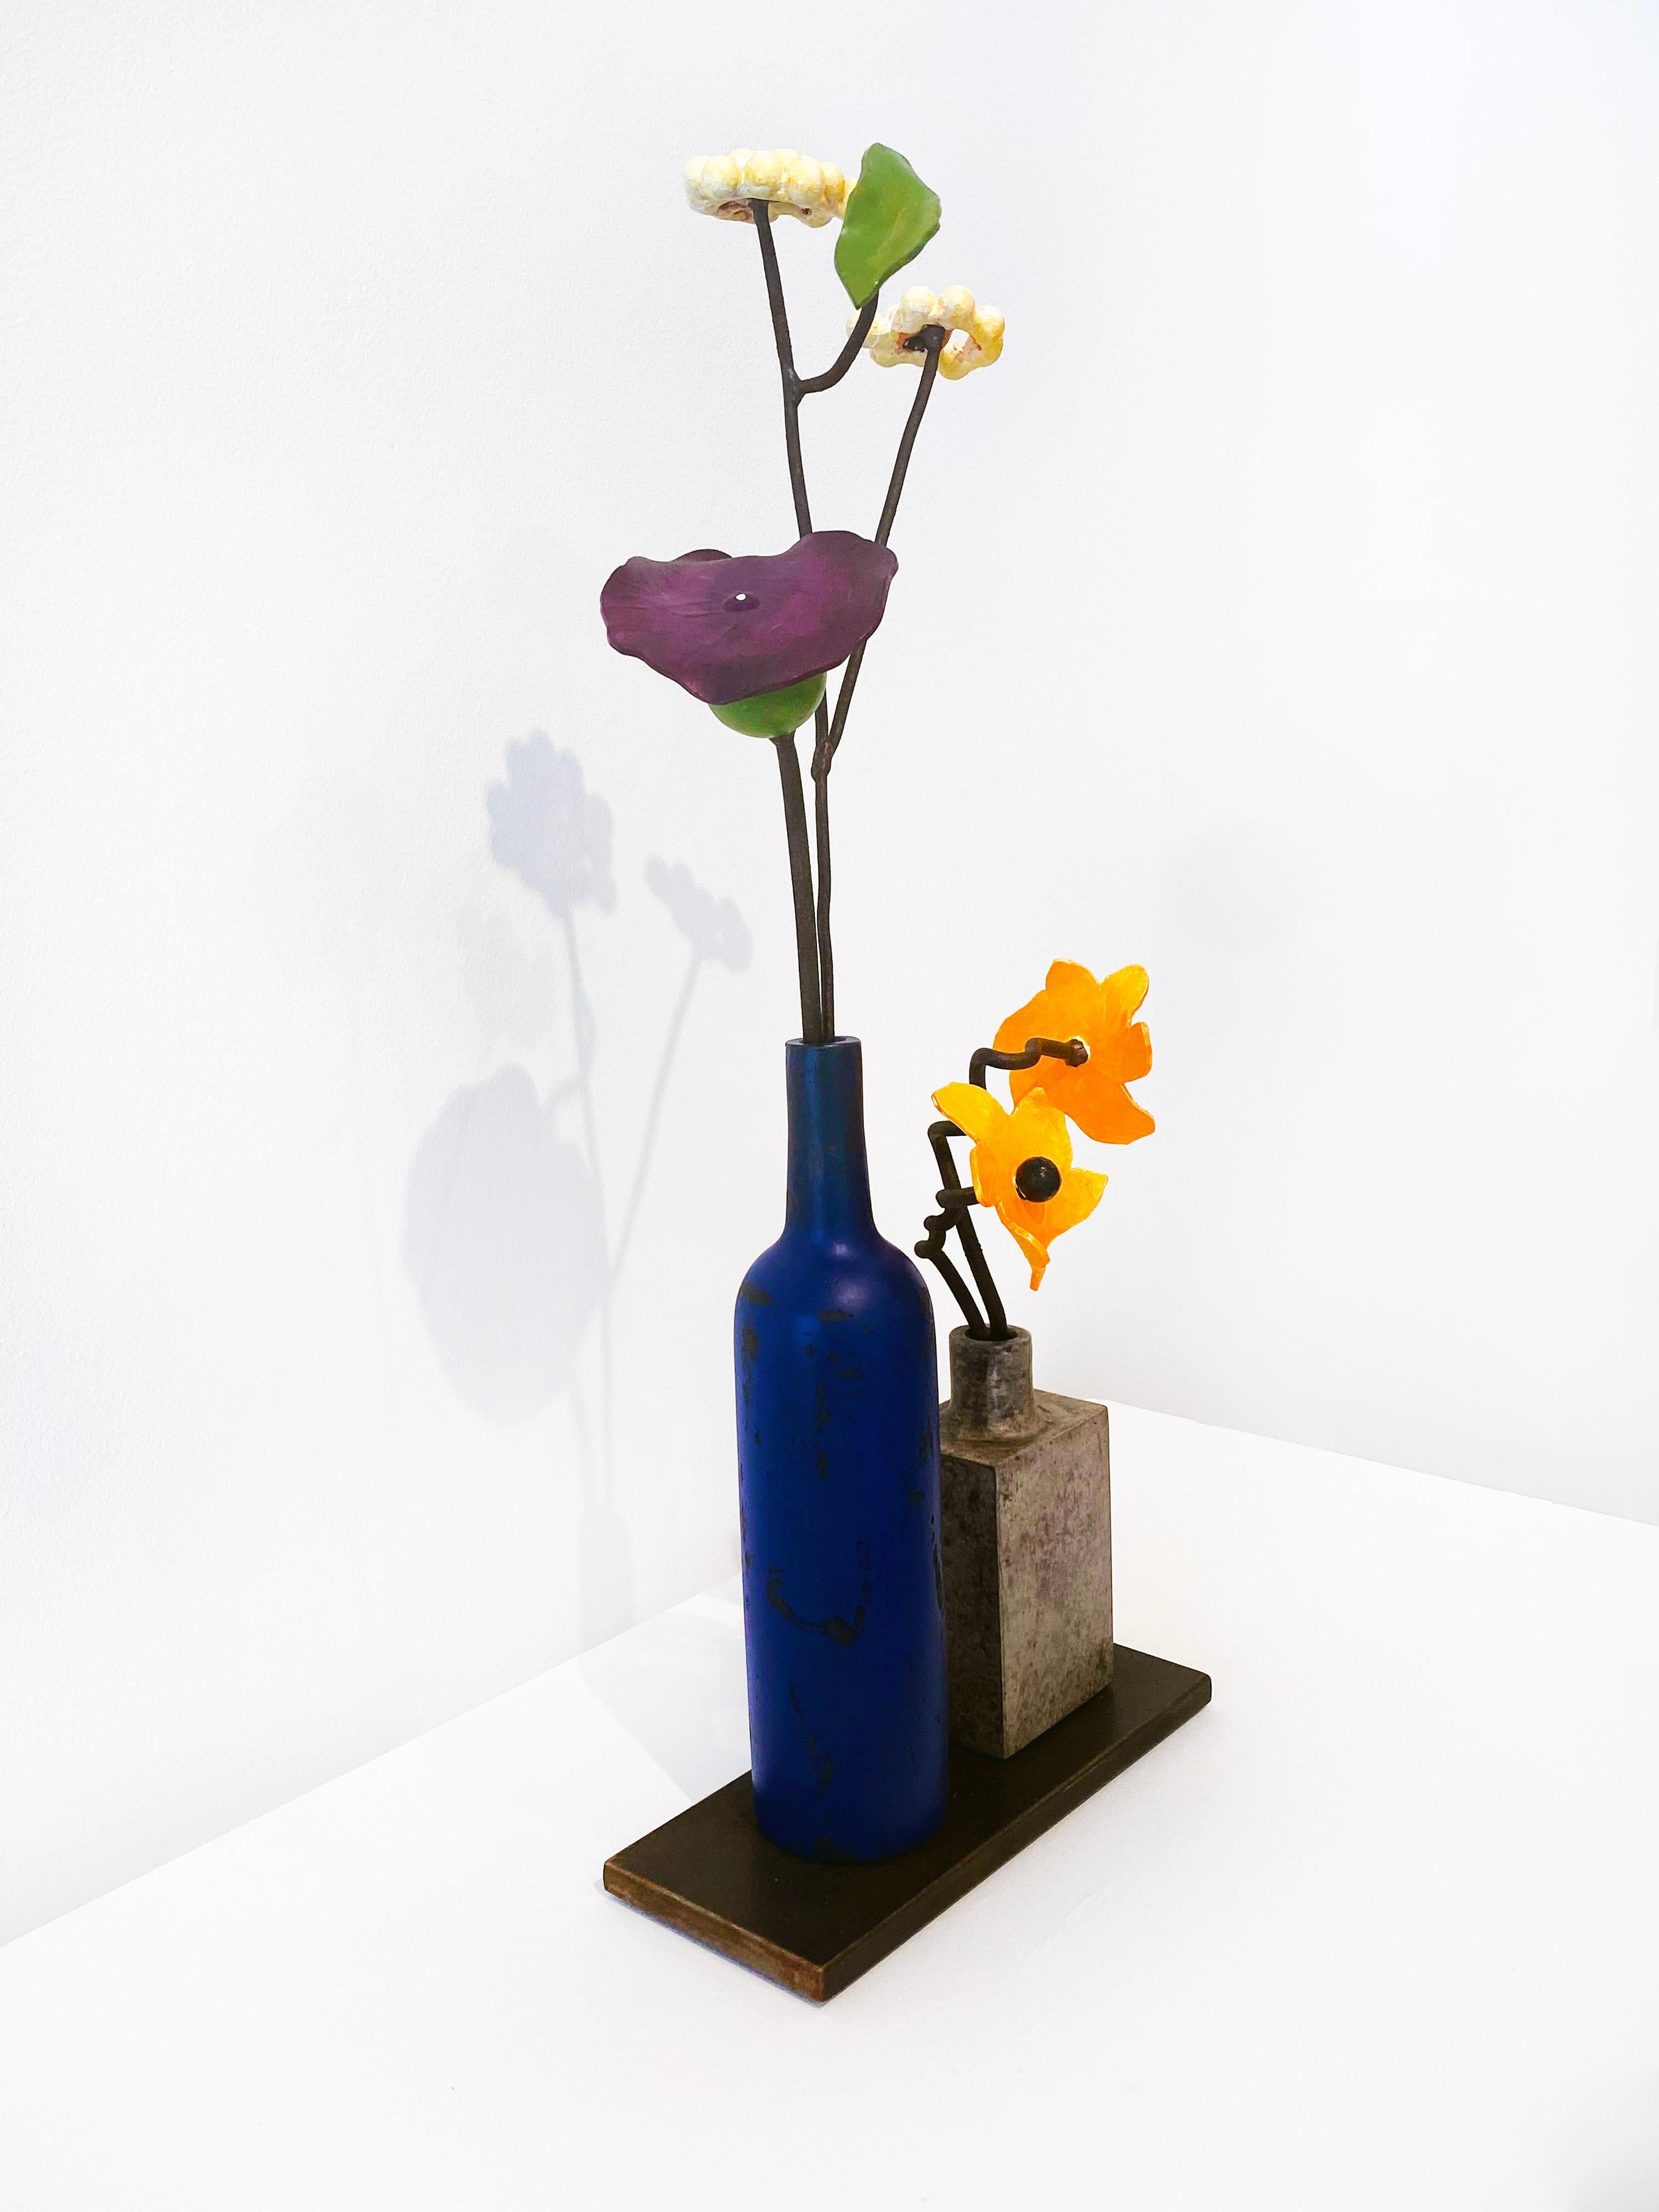 Bronze and Steel Sculpture by David Kimball Anderson 'Blue Bottle Summer' 4